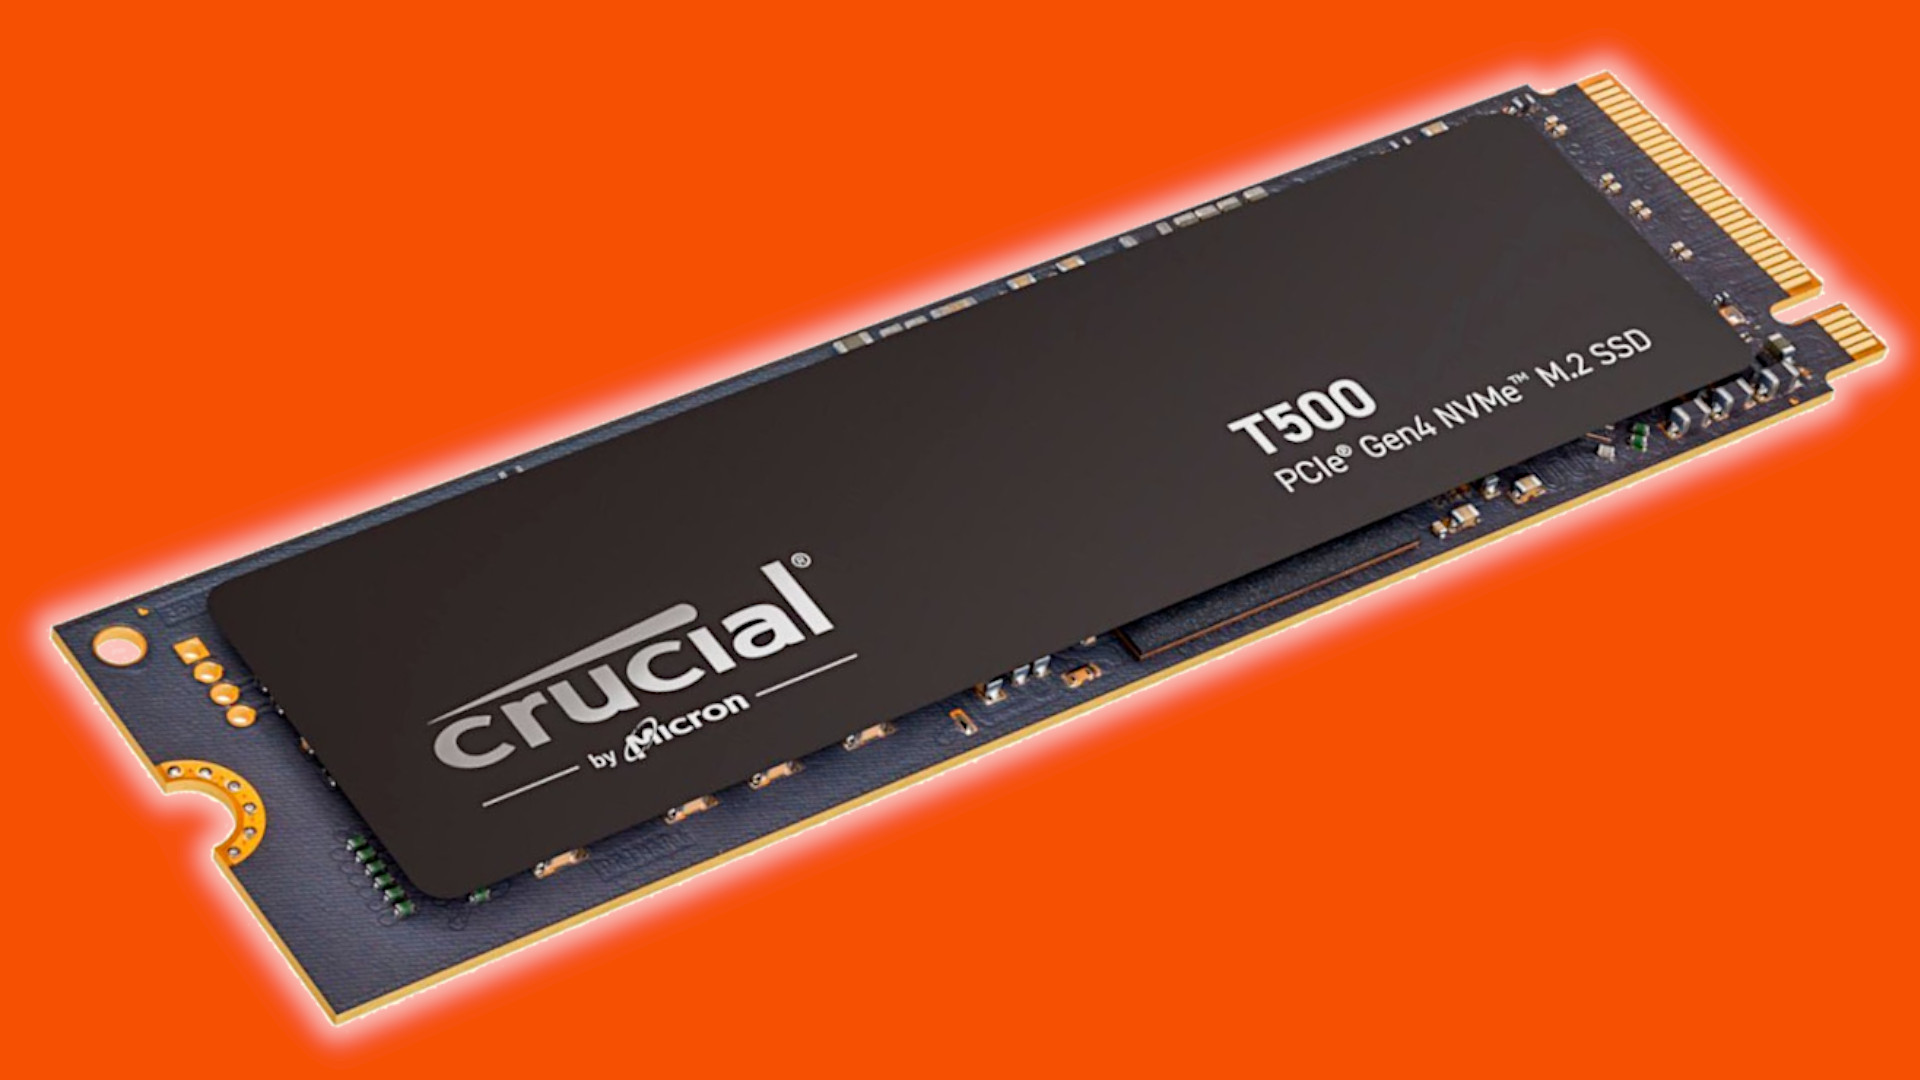 Save 44% on this fast Crucial SSD and get more room for PC games